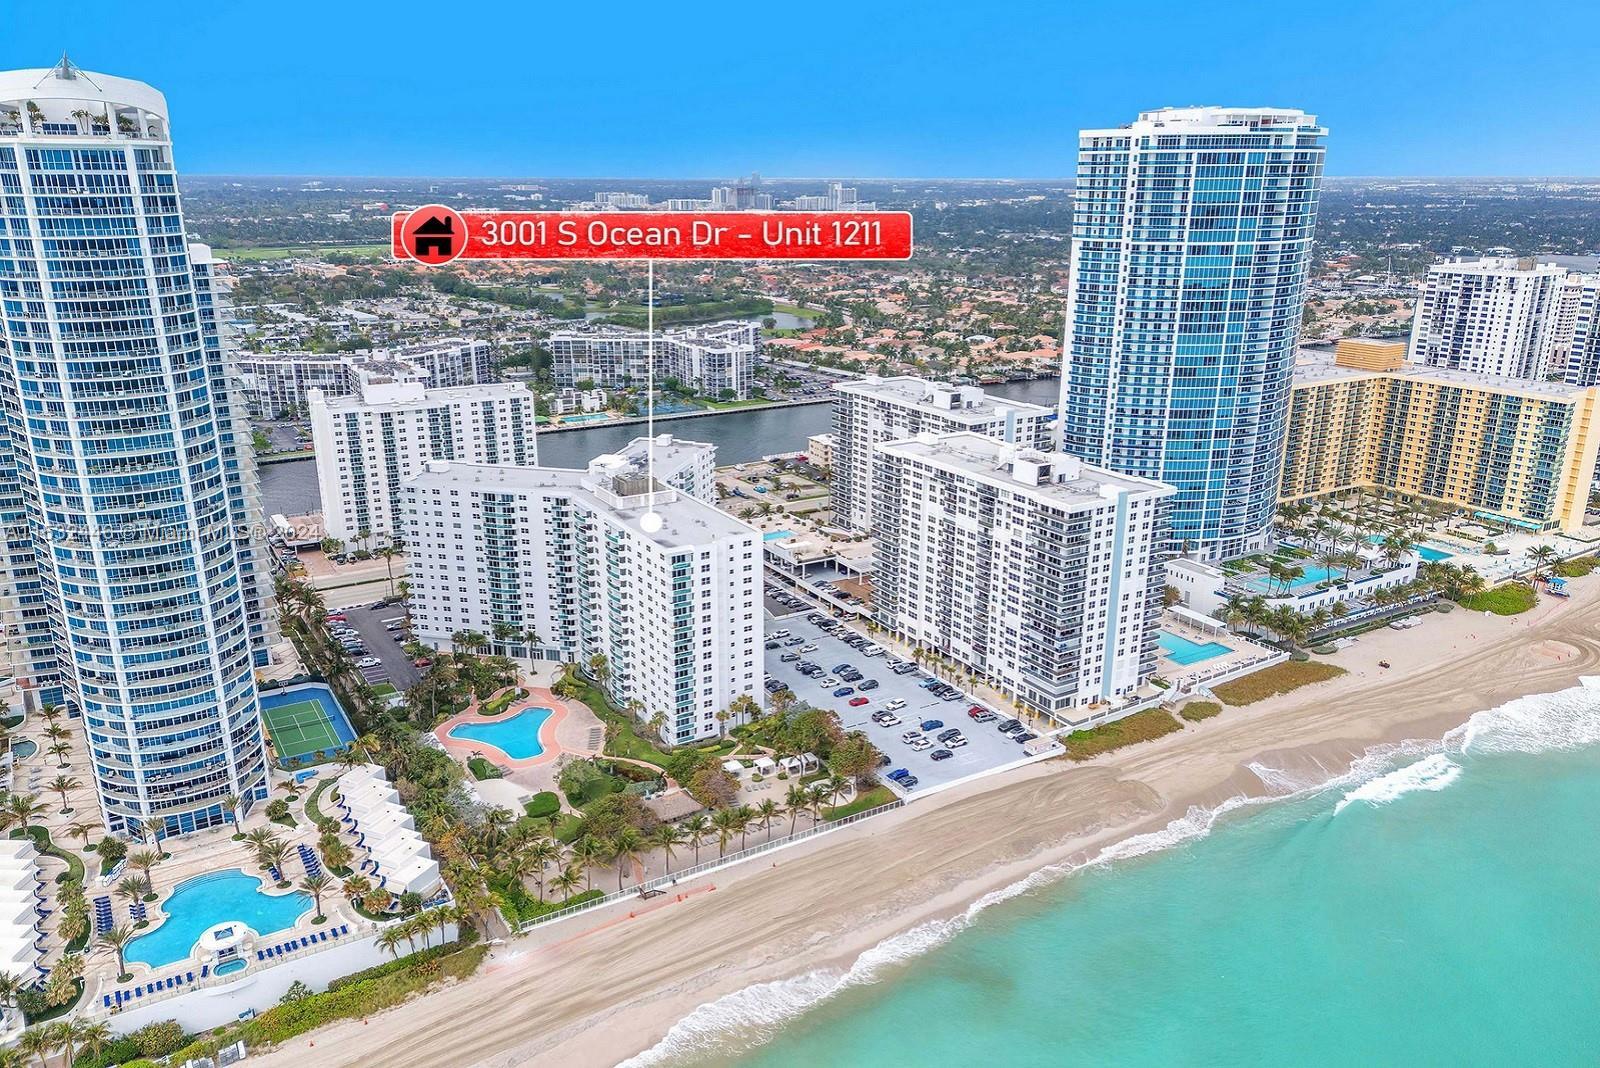 EXPERIENCE OCEANFRONT LIVING AT ITS FINEST FROM THE 12TH FLOOR OF THE LUXURIOUS RESIDENCES ON HOLLYW